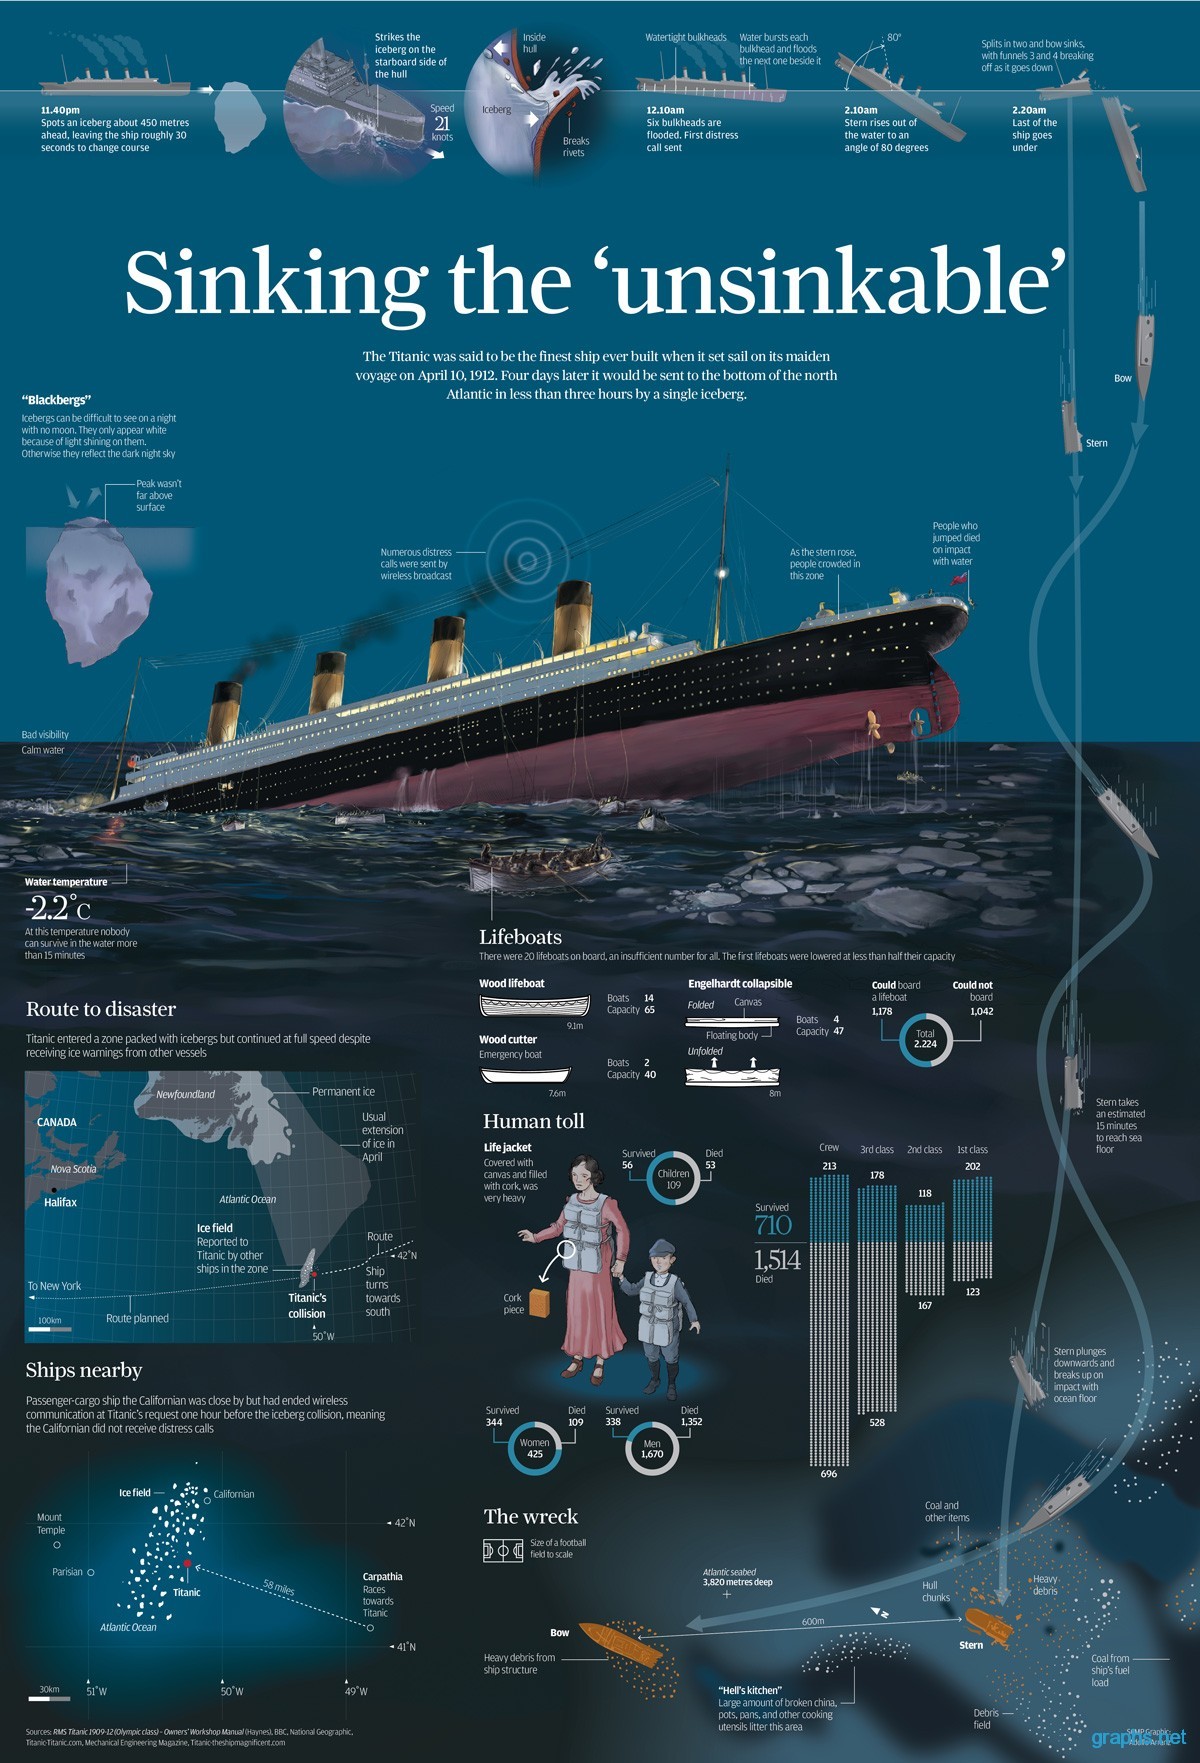 An Infographic About The Sinking Of The Unsinkable Rms